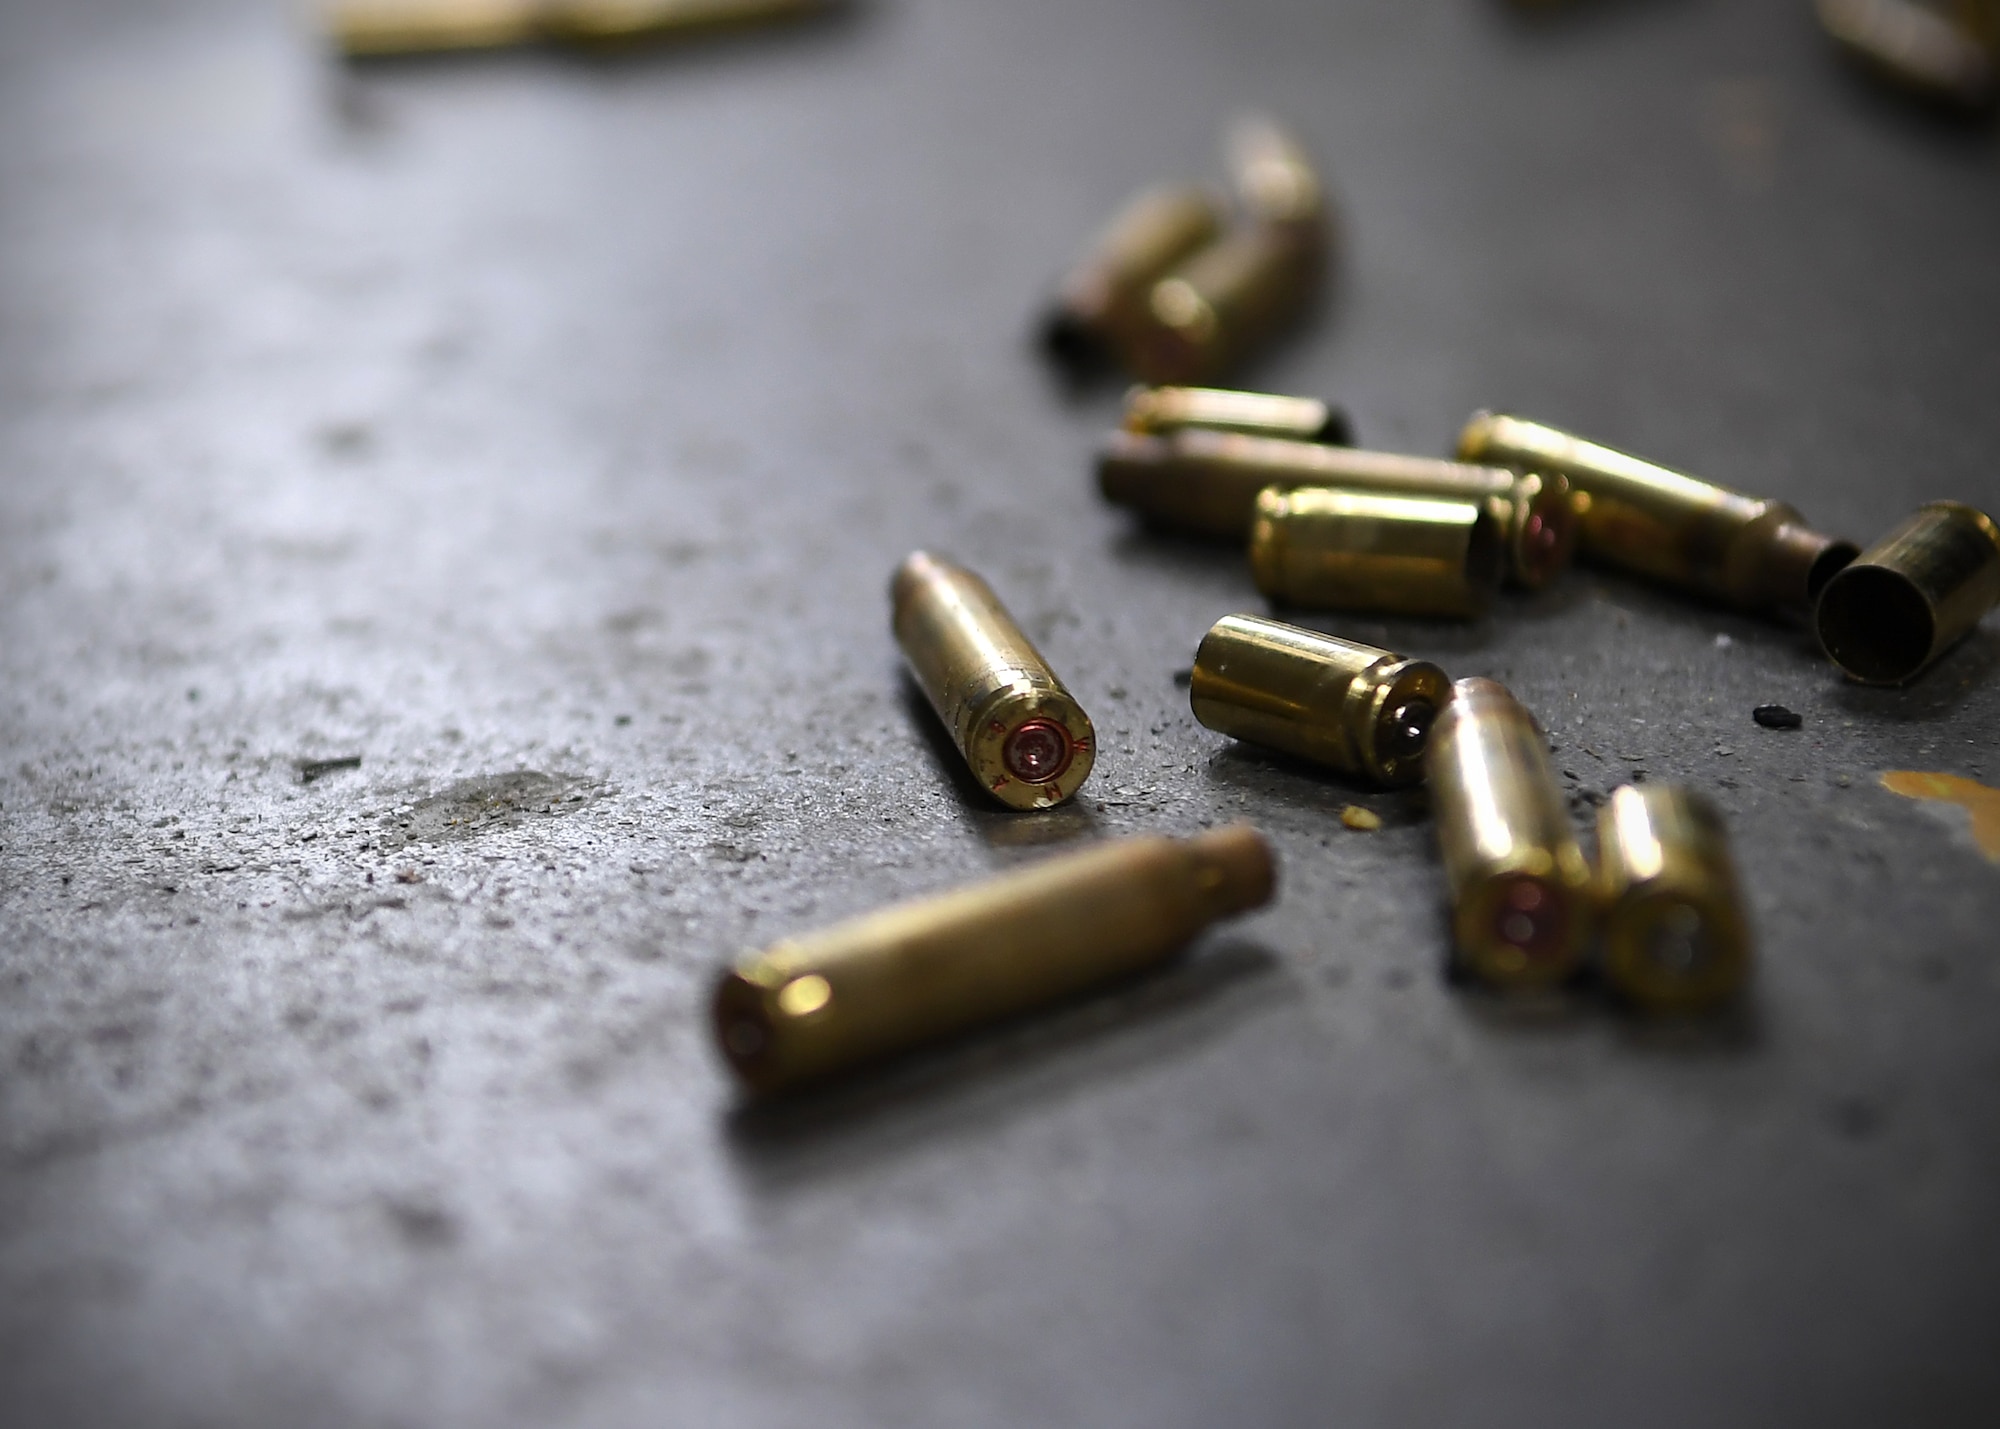 Empty shell casings scatter the ground of the shooting range May 16, 2019, on Grand Forks Air Force Base, North Dakota. The rounds were used during an excellence-in-competition shooting match, which was open to all active duty members on Grand Forks AFB. (U.S. Air Force photo by Senior Airman Elora J. Martinez)